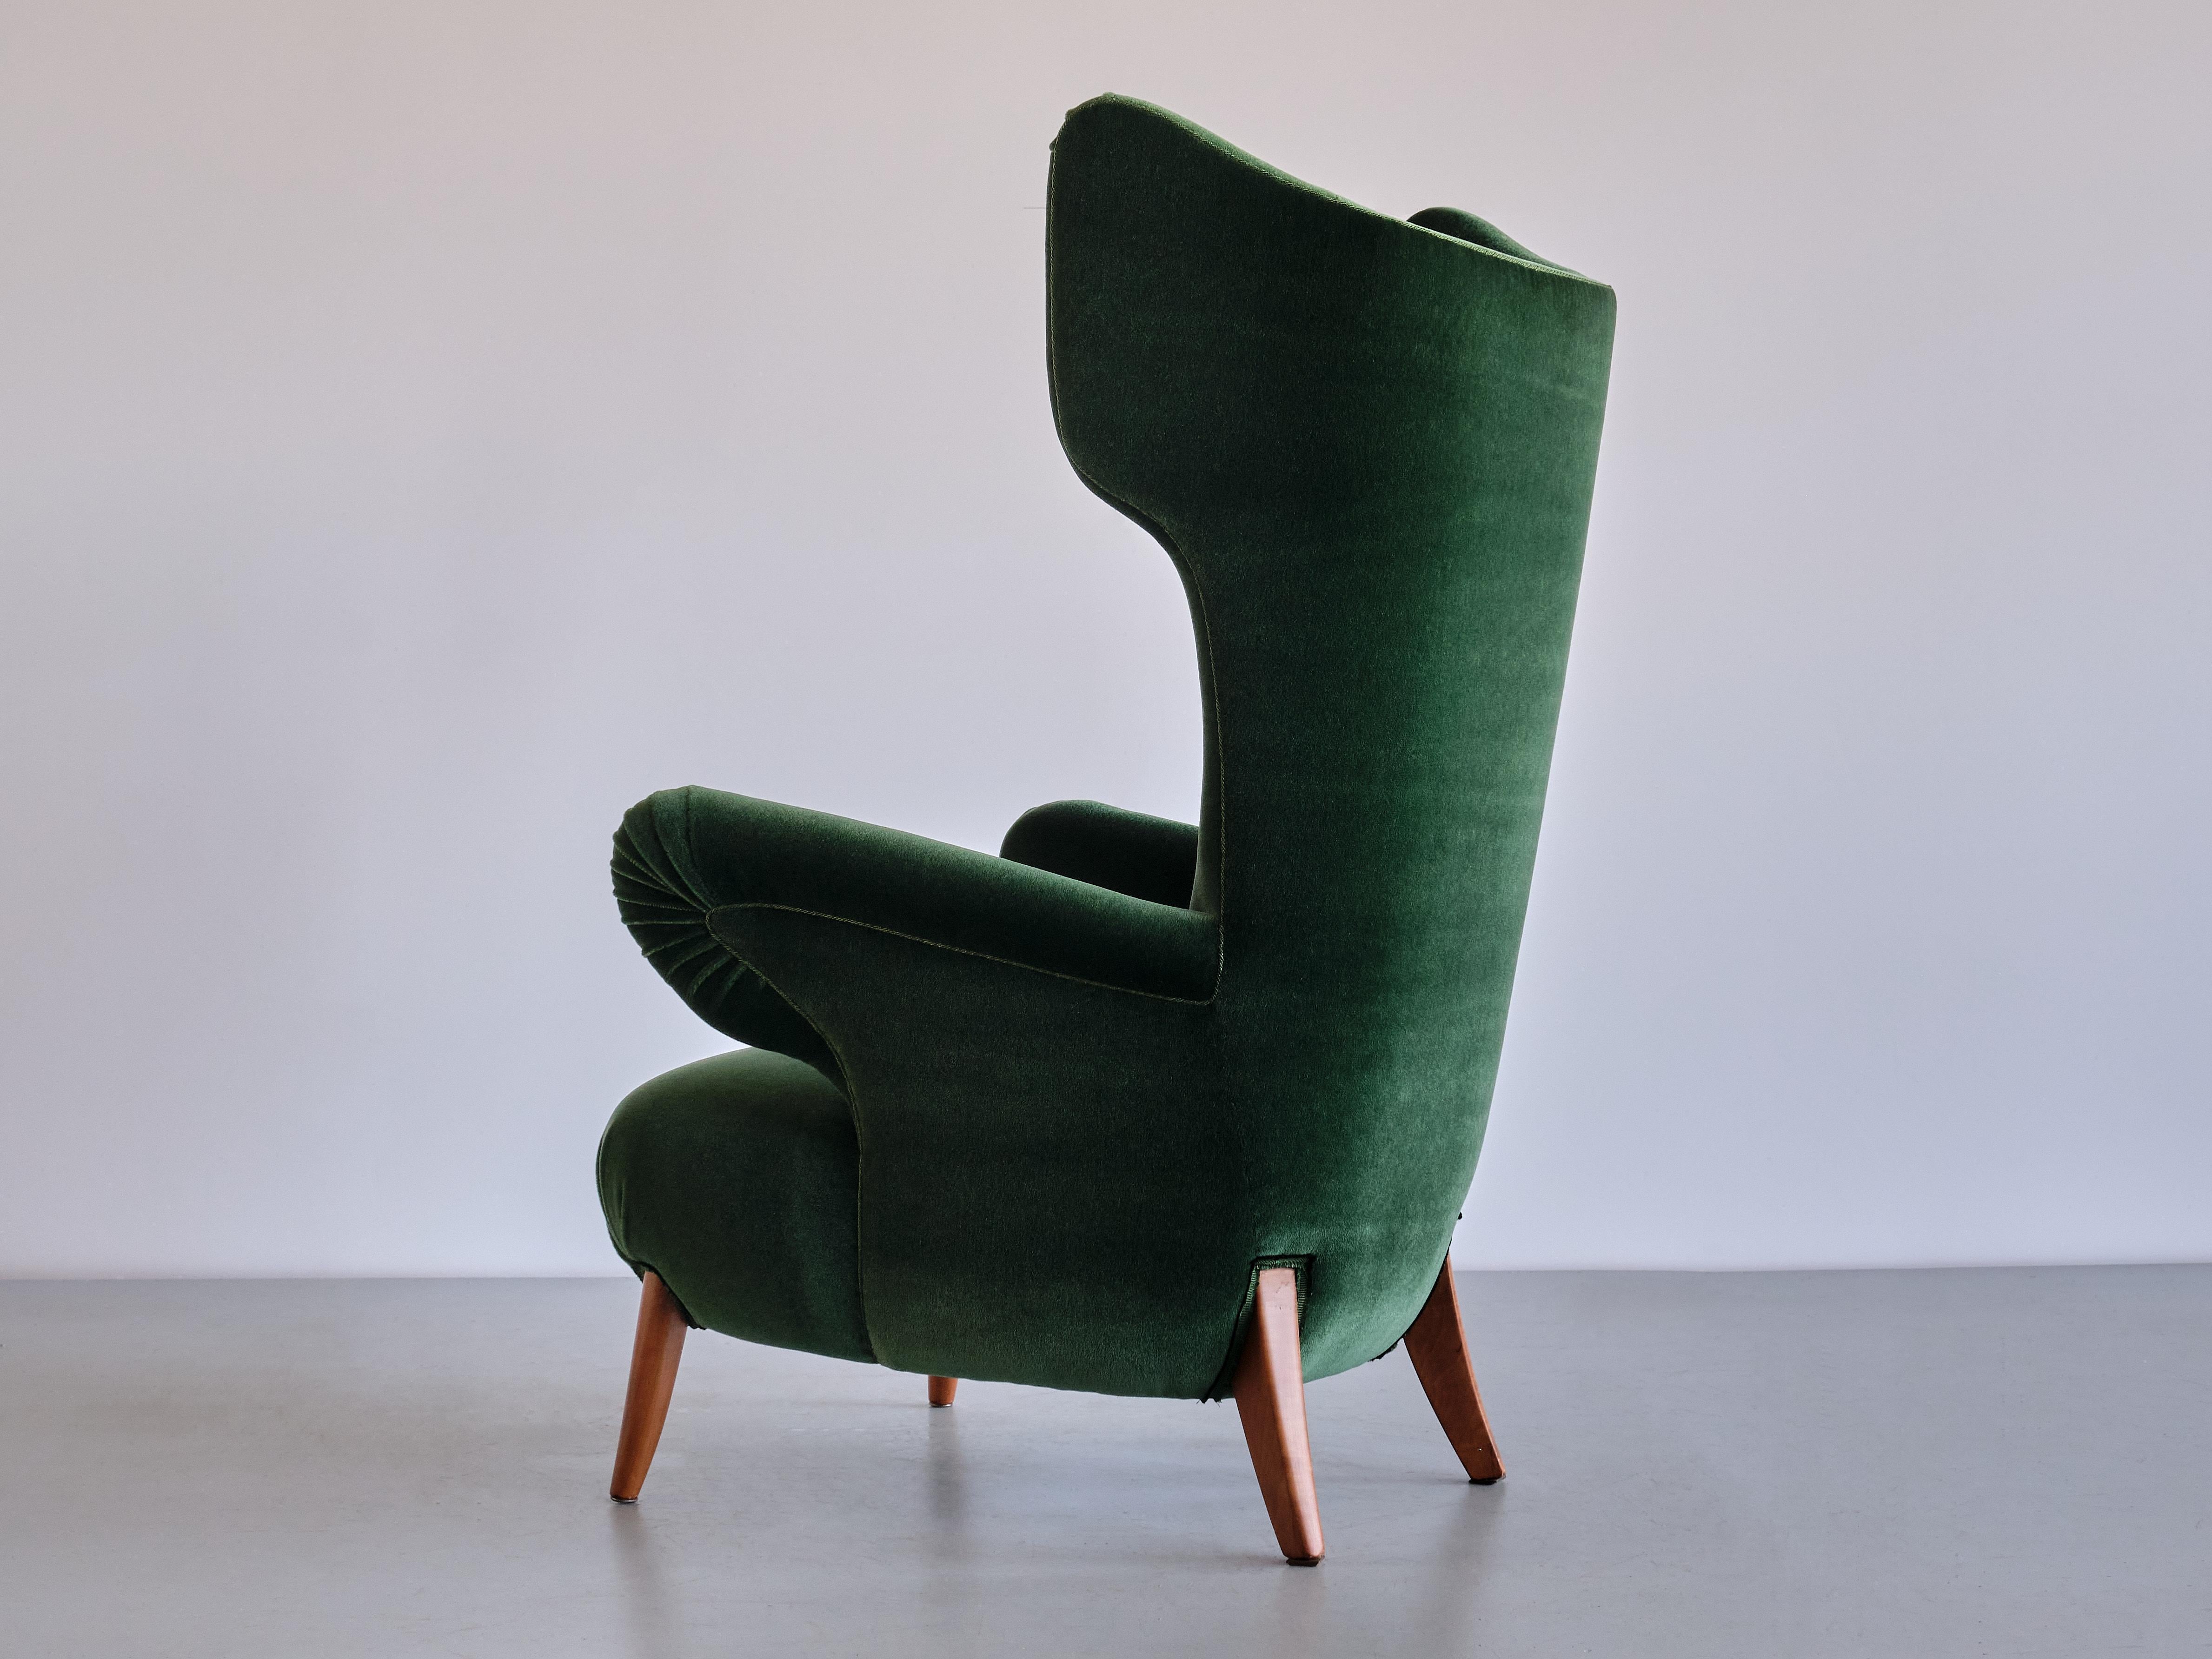 Important Ottorino Aloisio Wingback Chair in Green Mohair, Colli, Italy, 1957 For Sale 4